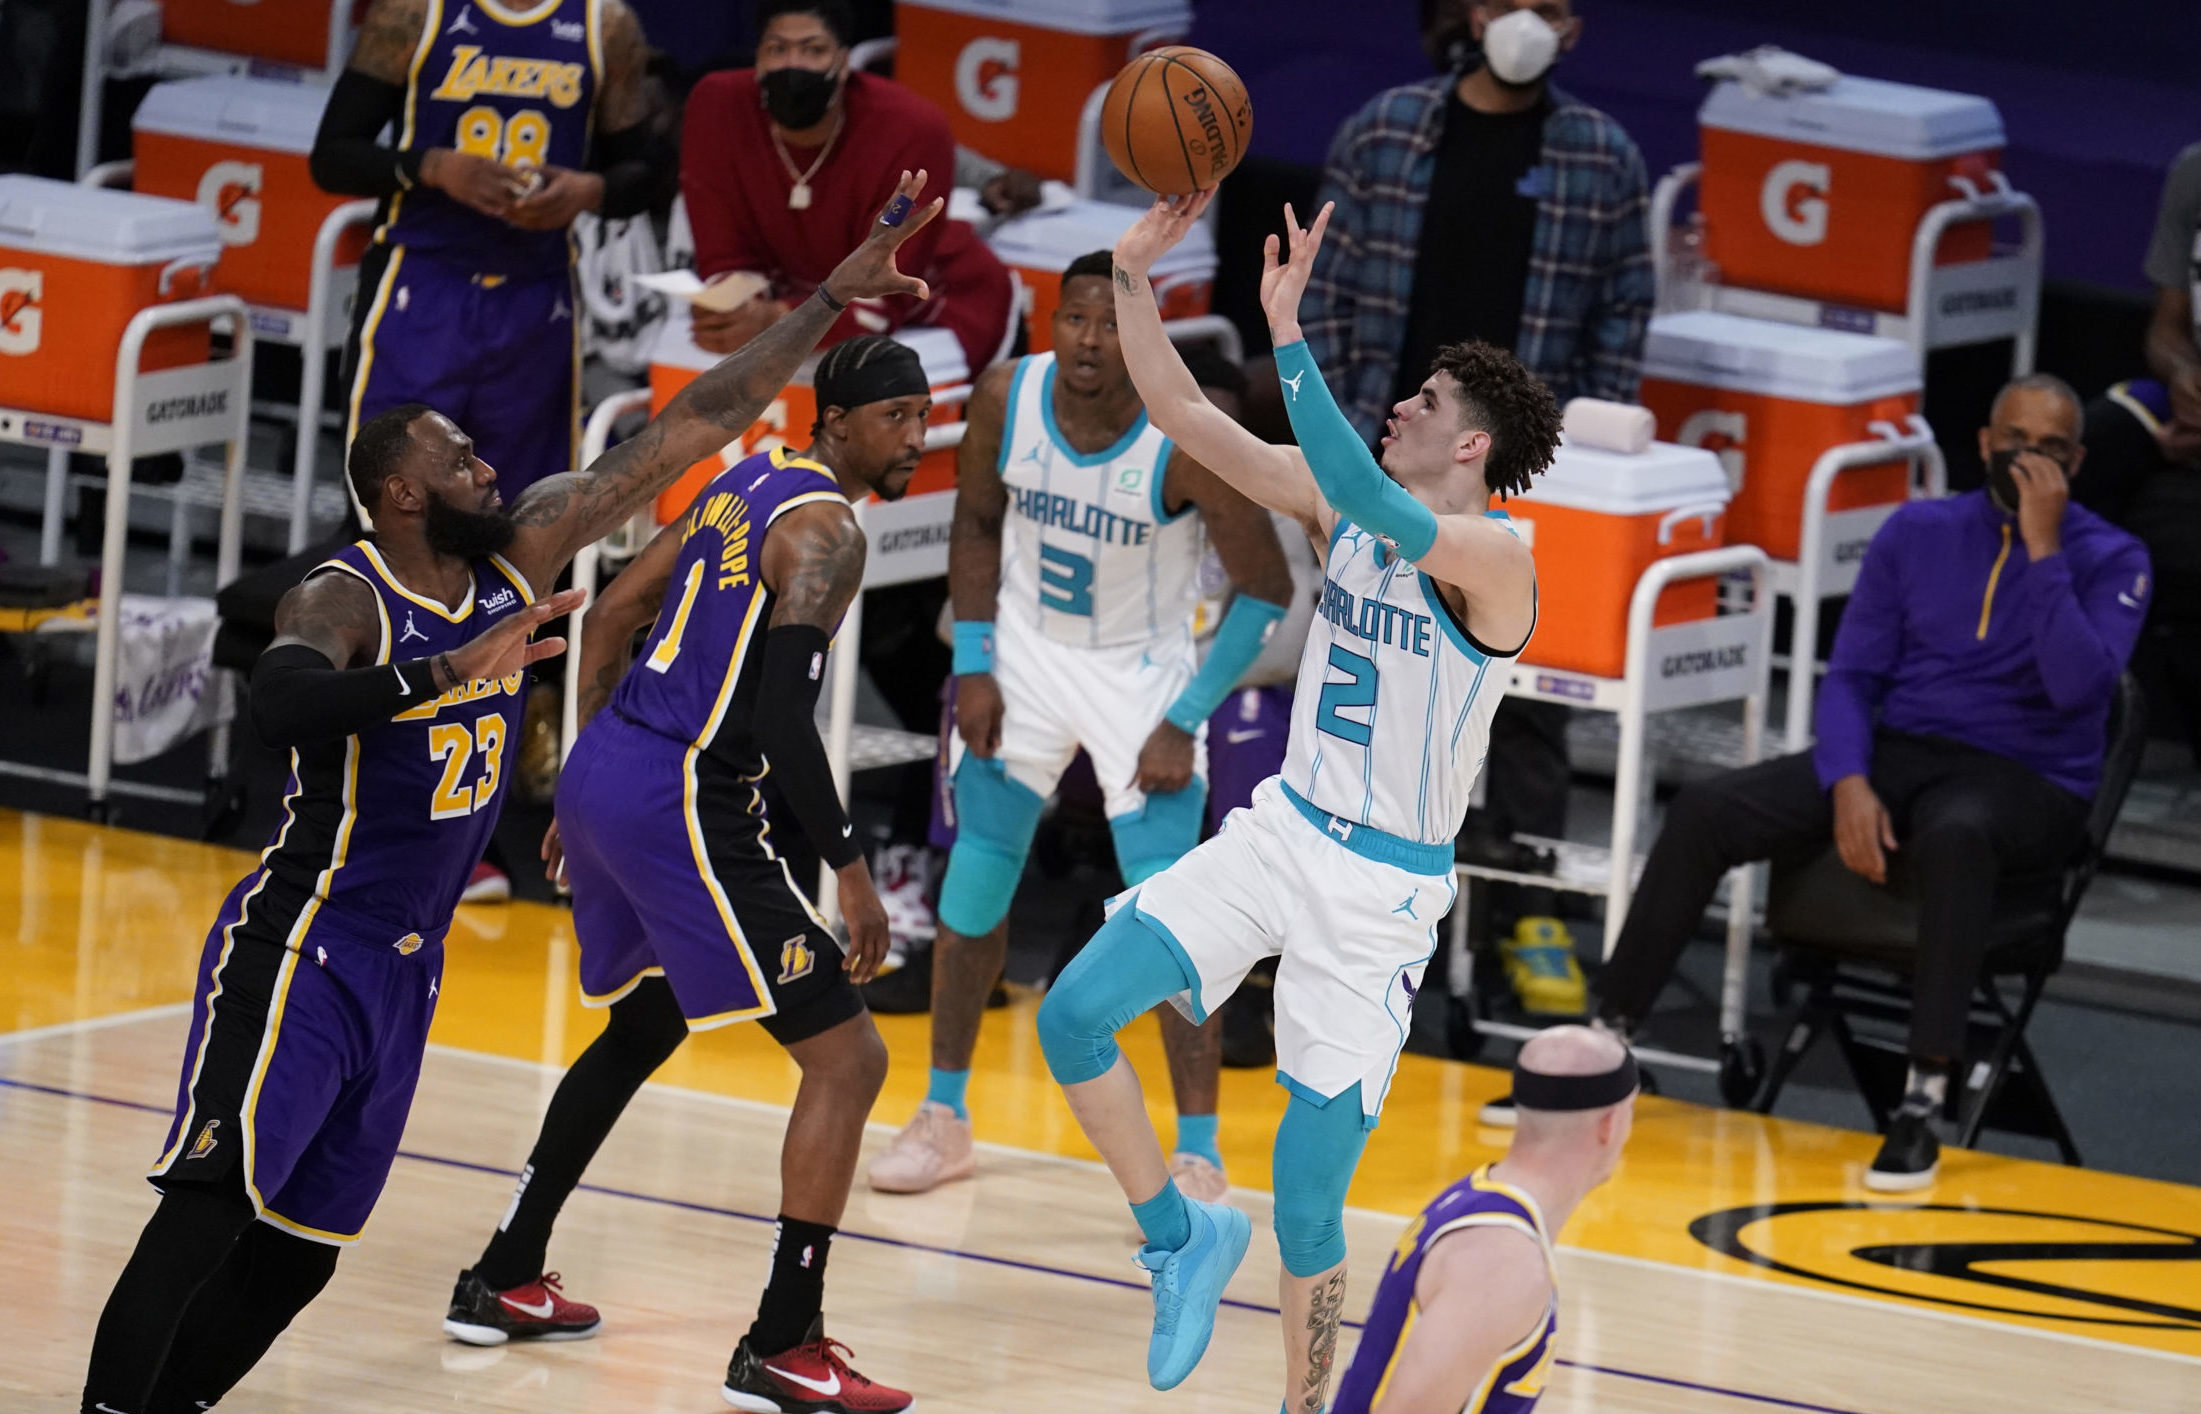 vs. Lakers game on January 28 in Charlotte will be televised on